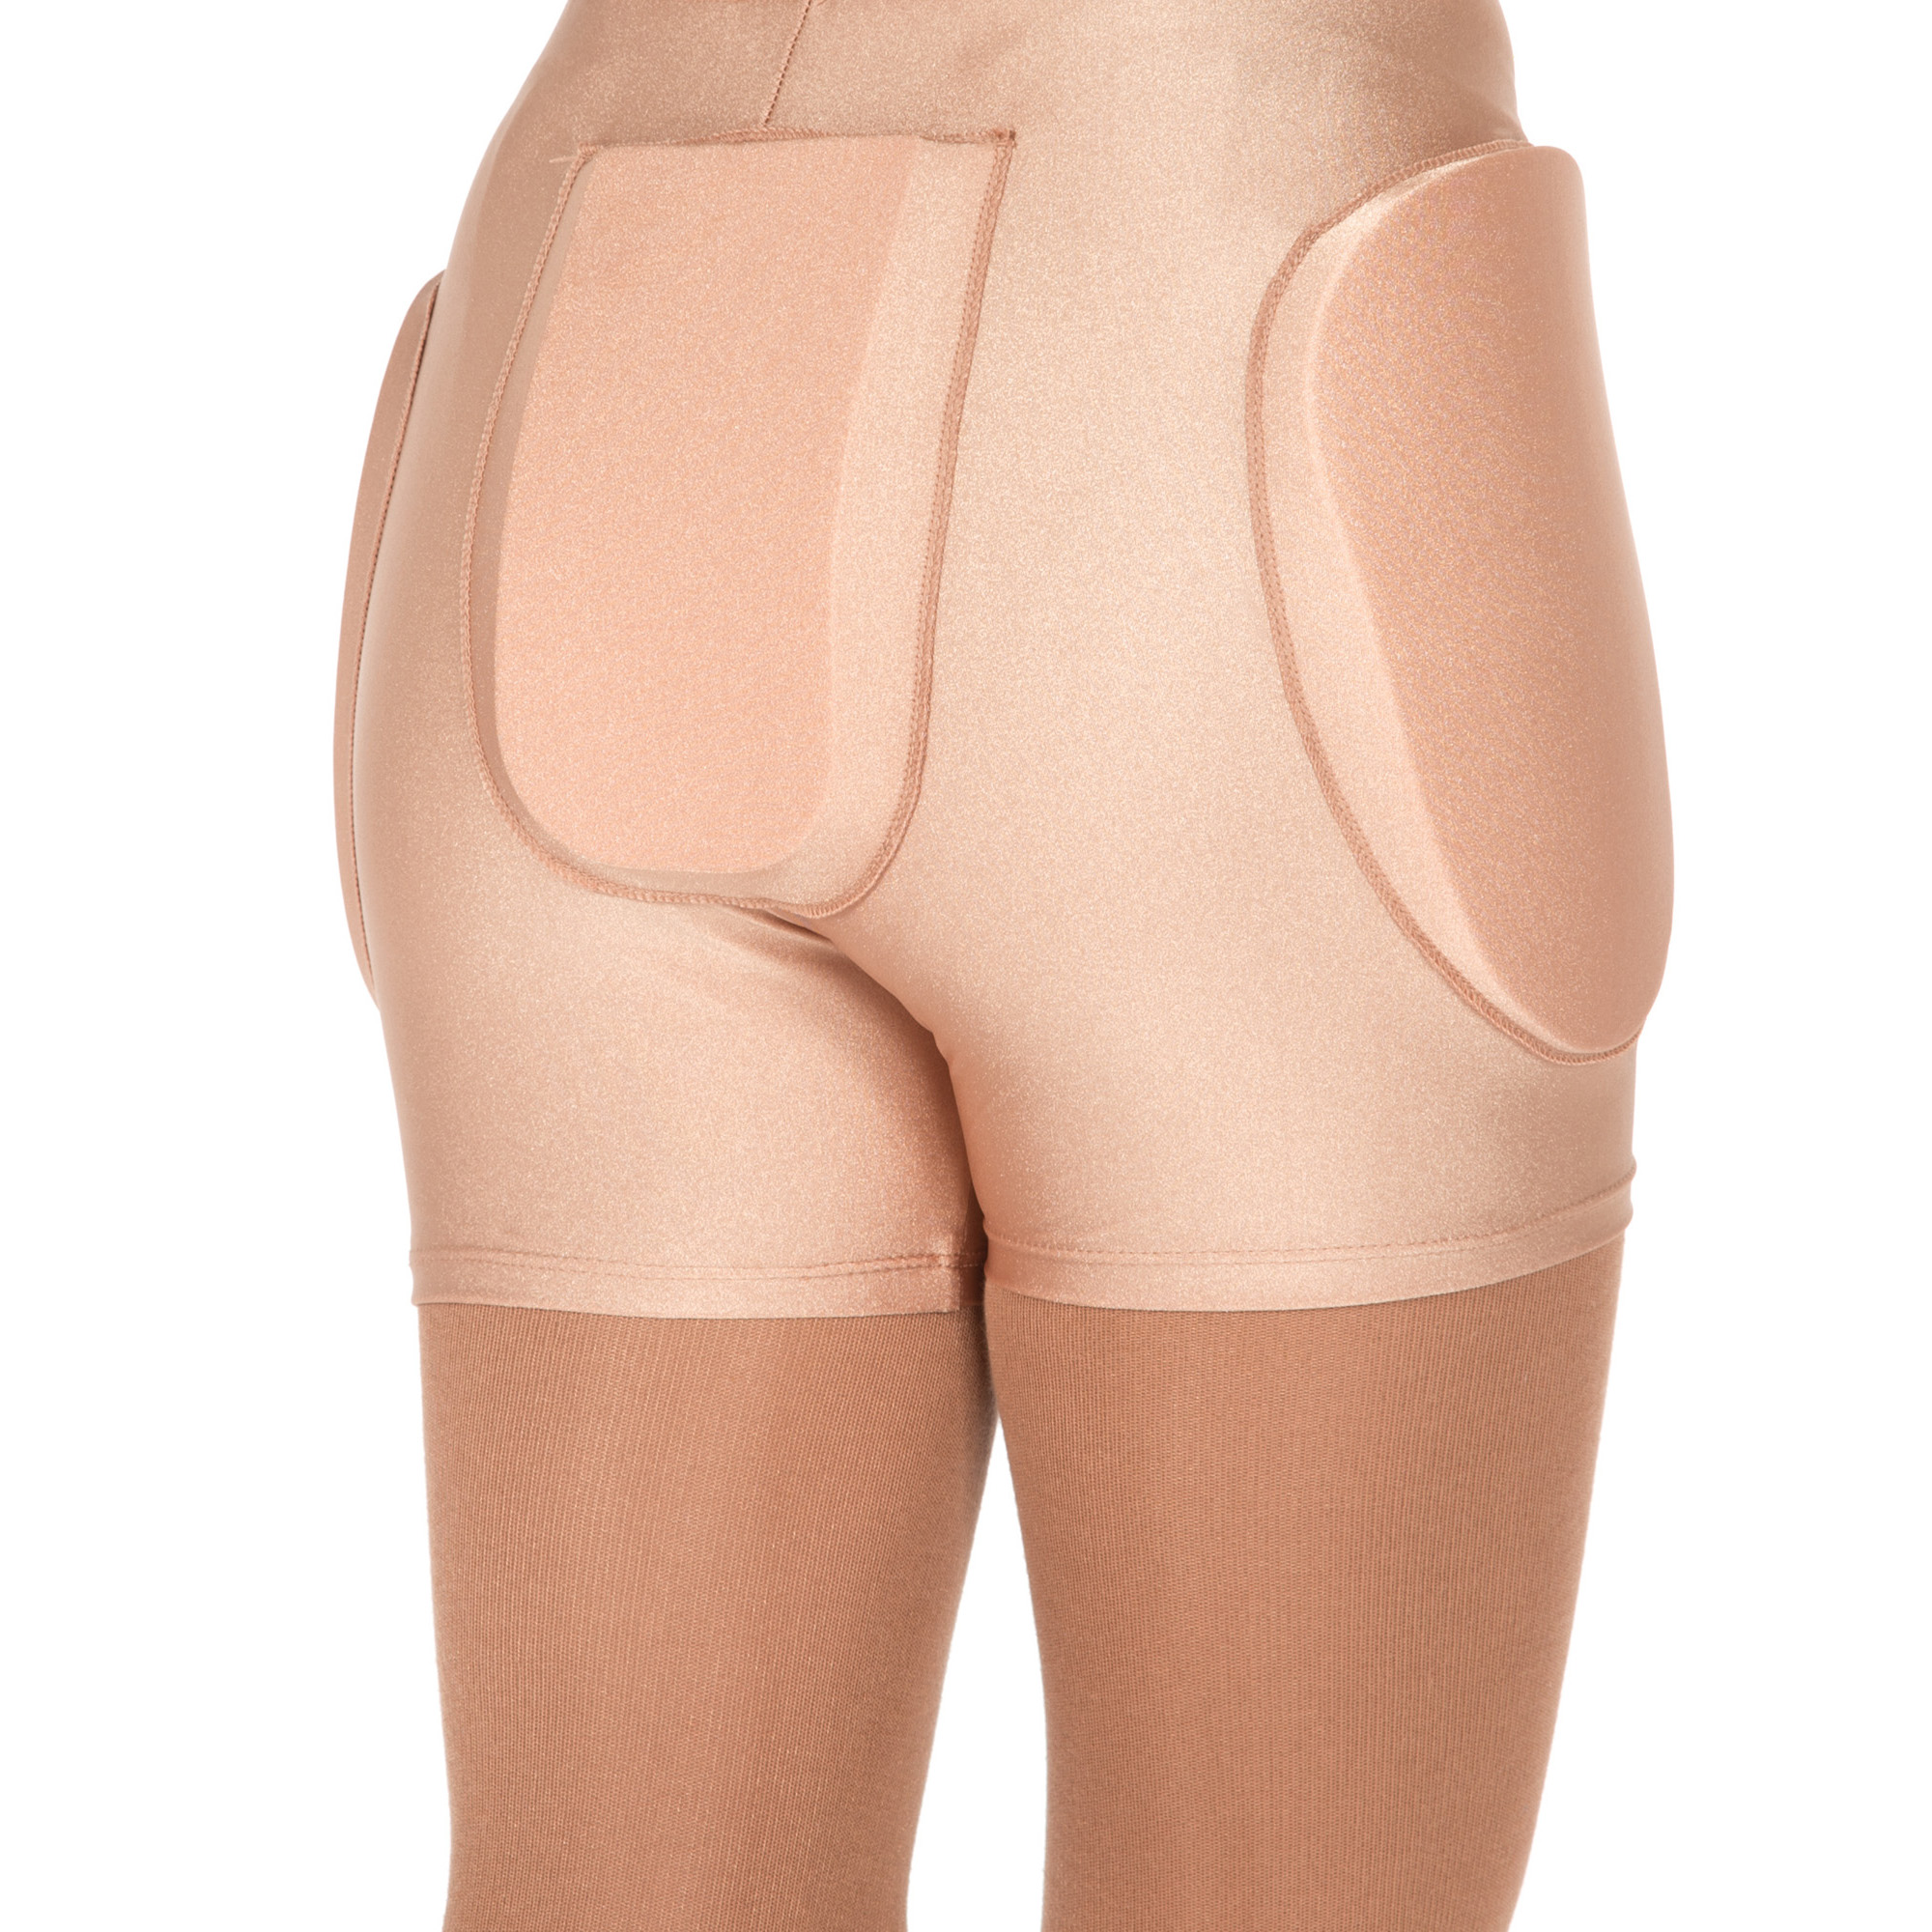 Protection short Diezz Short Protect - Hiver 2024